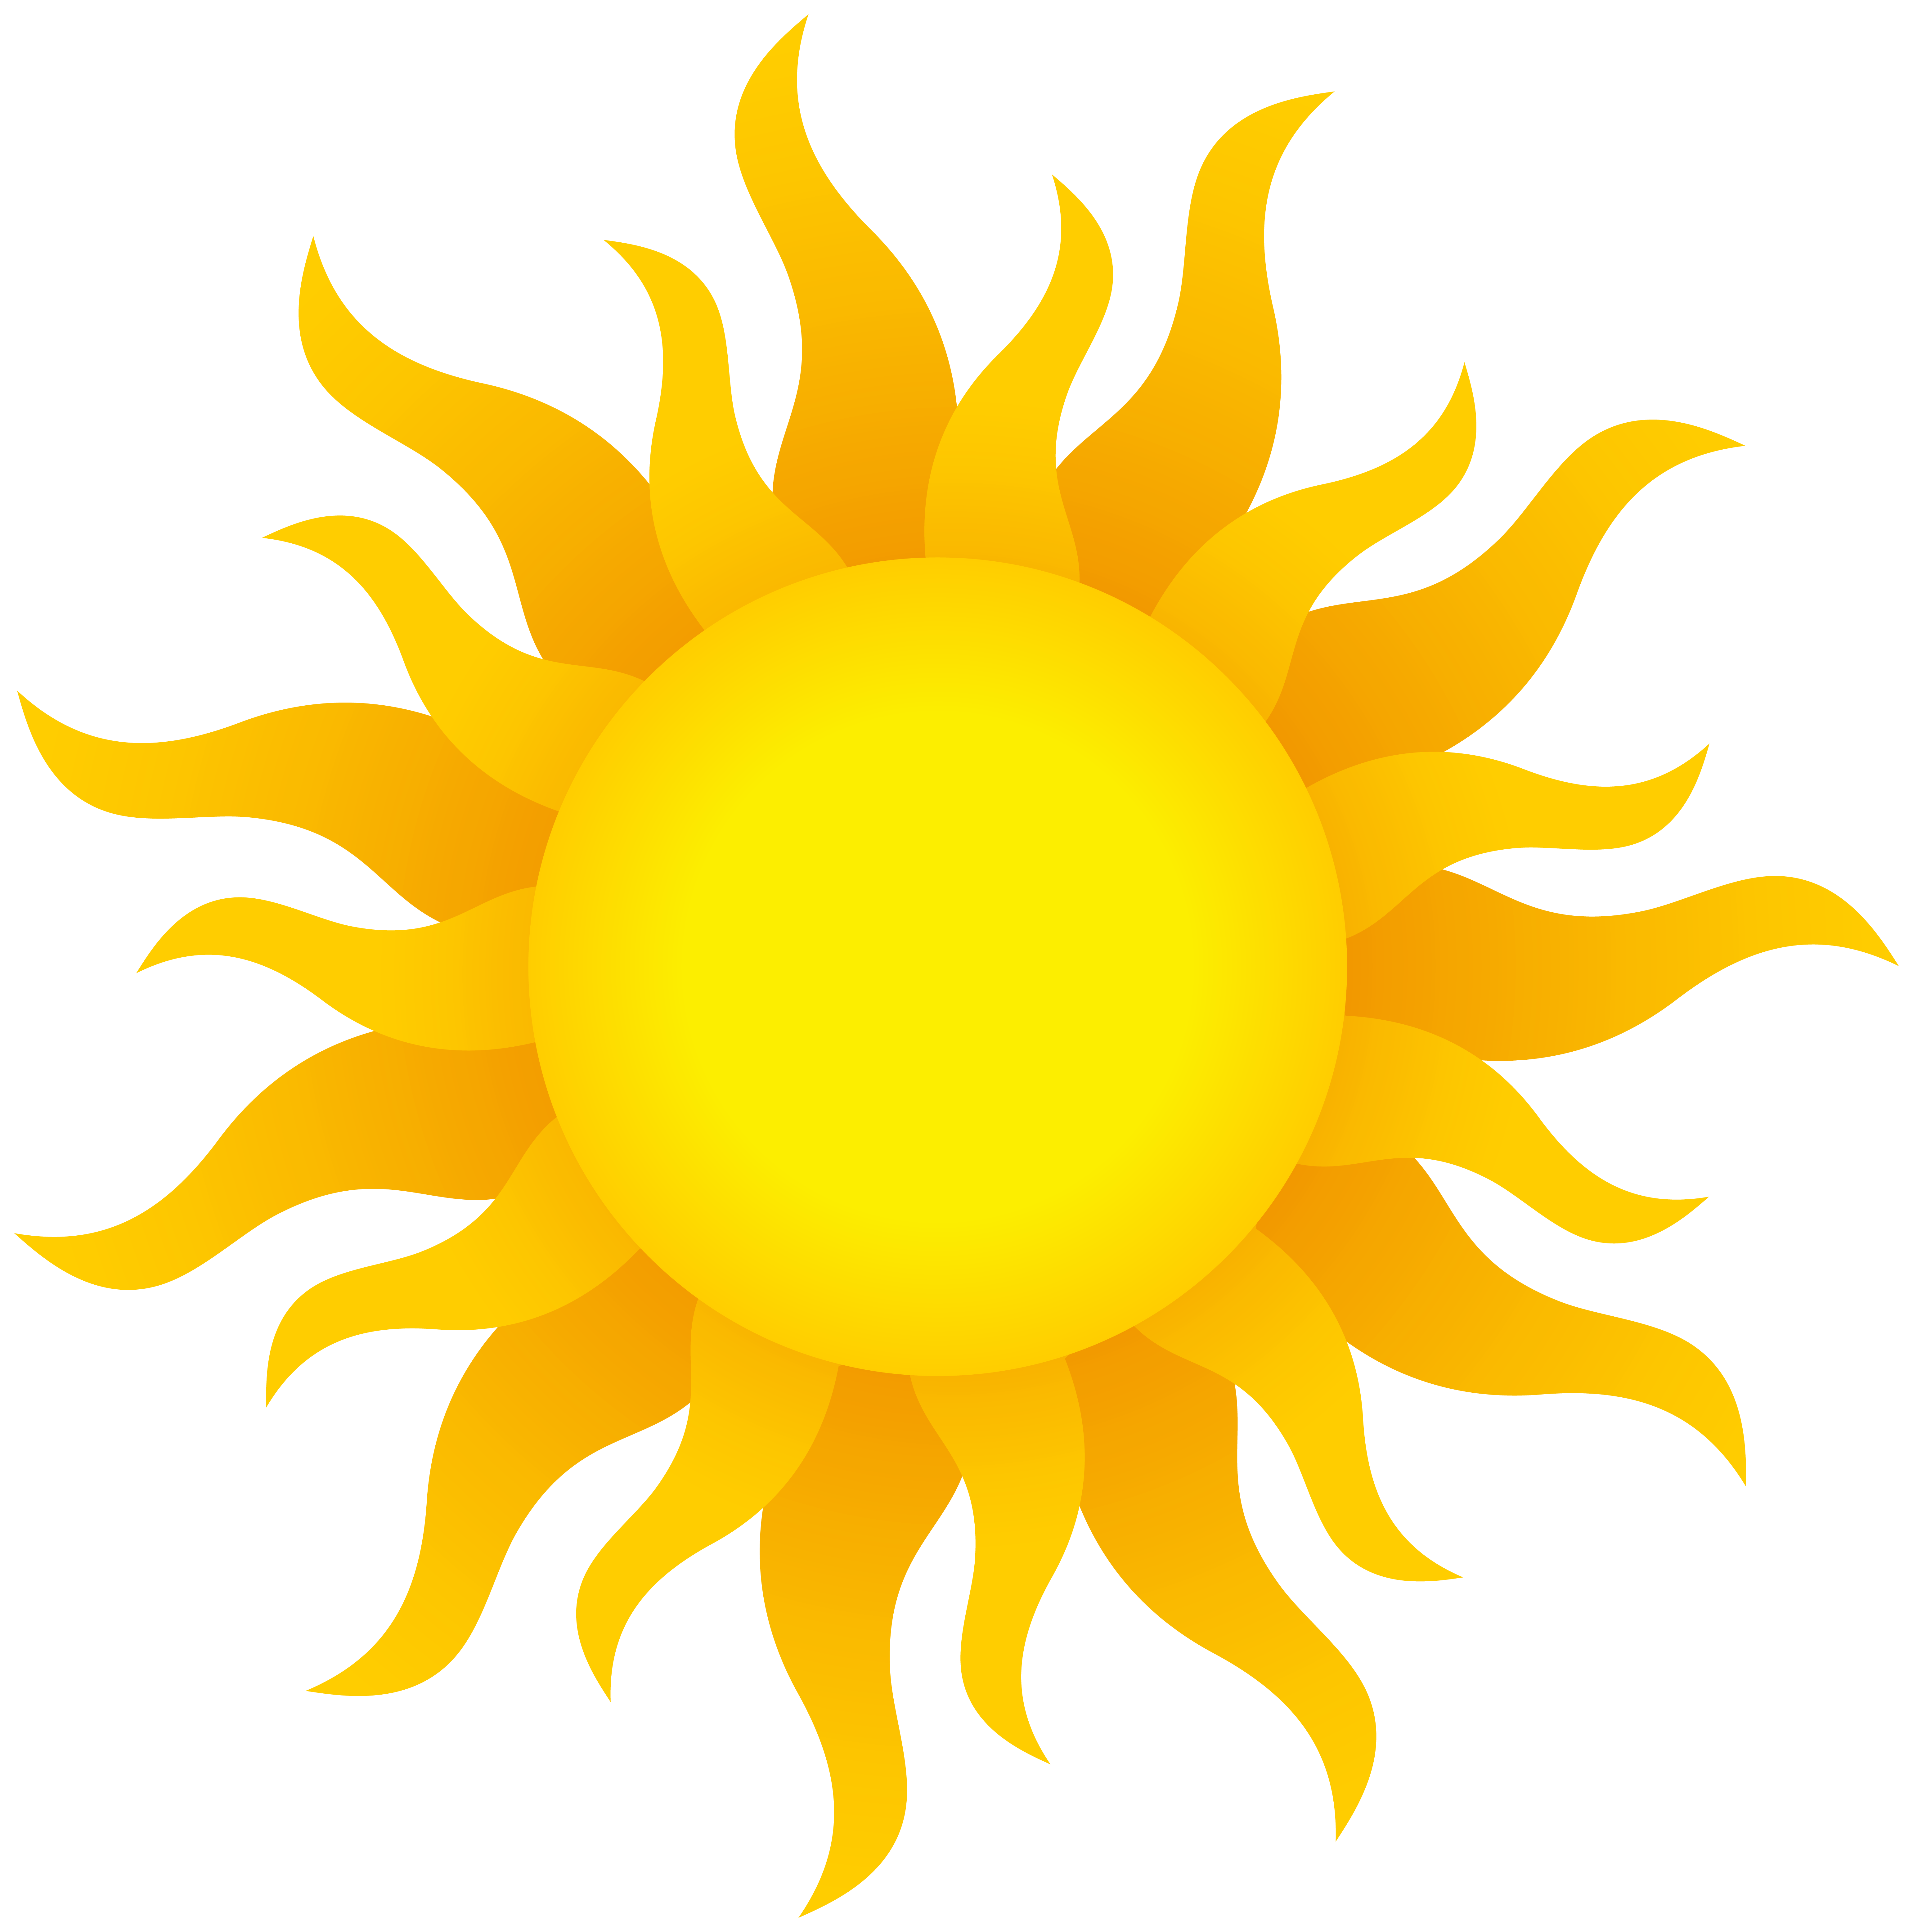 Clip art - Sun Rays png download - 6165*6226 - Free Transparent png